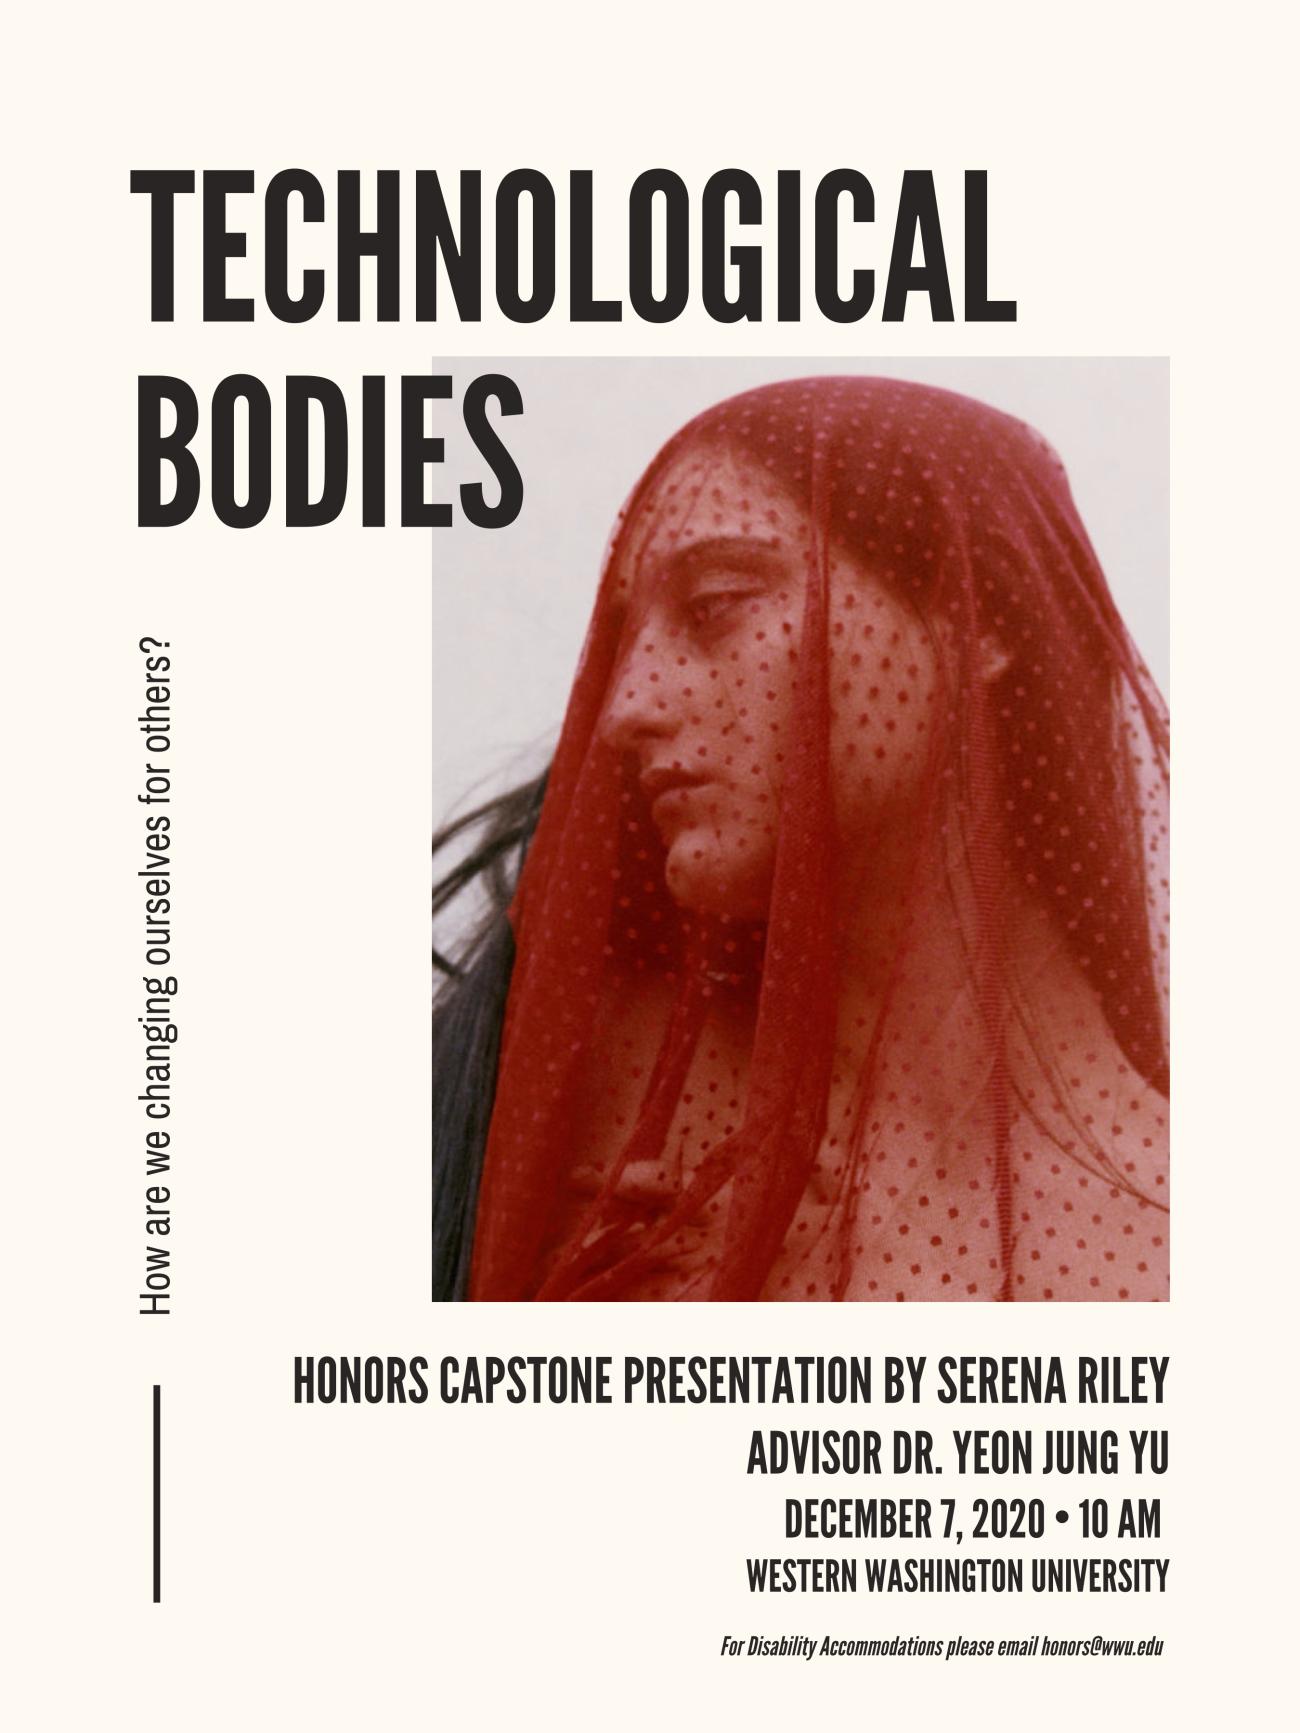   Image: Photograph of a woman with a red veil over her face. Text reads "Technological Bodies: How are we Changing Ourselves for Others? Honors Capstone Presentation by Serena Riley. Advisor: Dr.  Yeon Jung Yu. December 7th, 2020 at 10am. Western Washington University. For Disability Accommodations please email honors@wwu.edu."